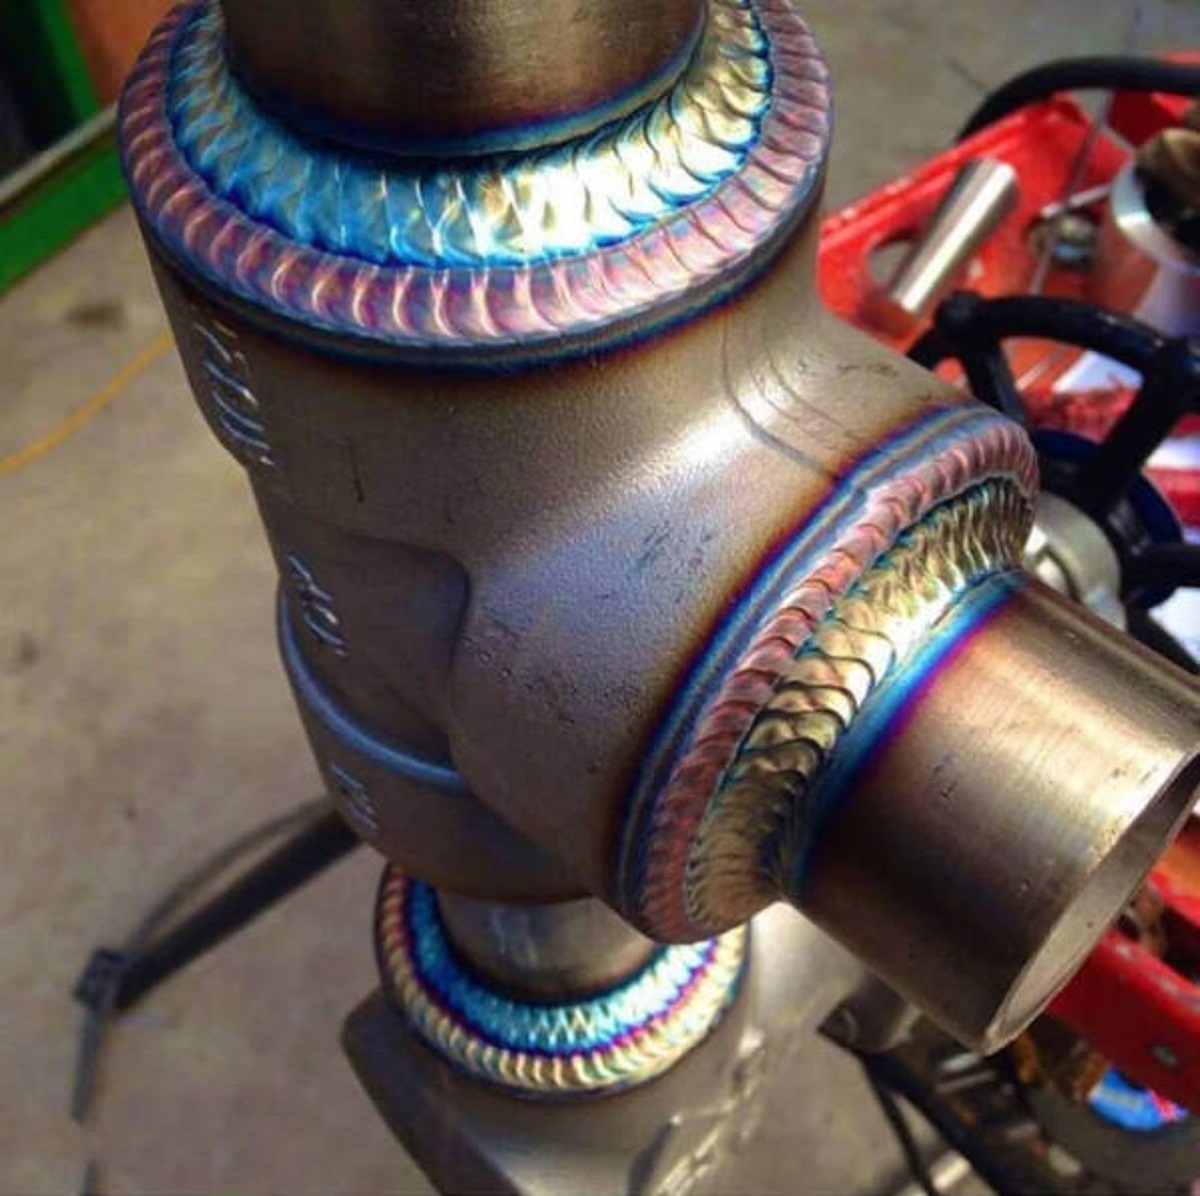 "The perfect weld bead from a master welder."